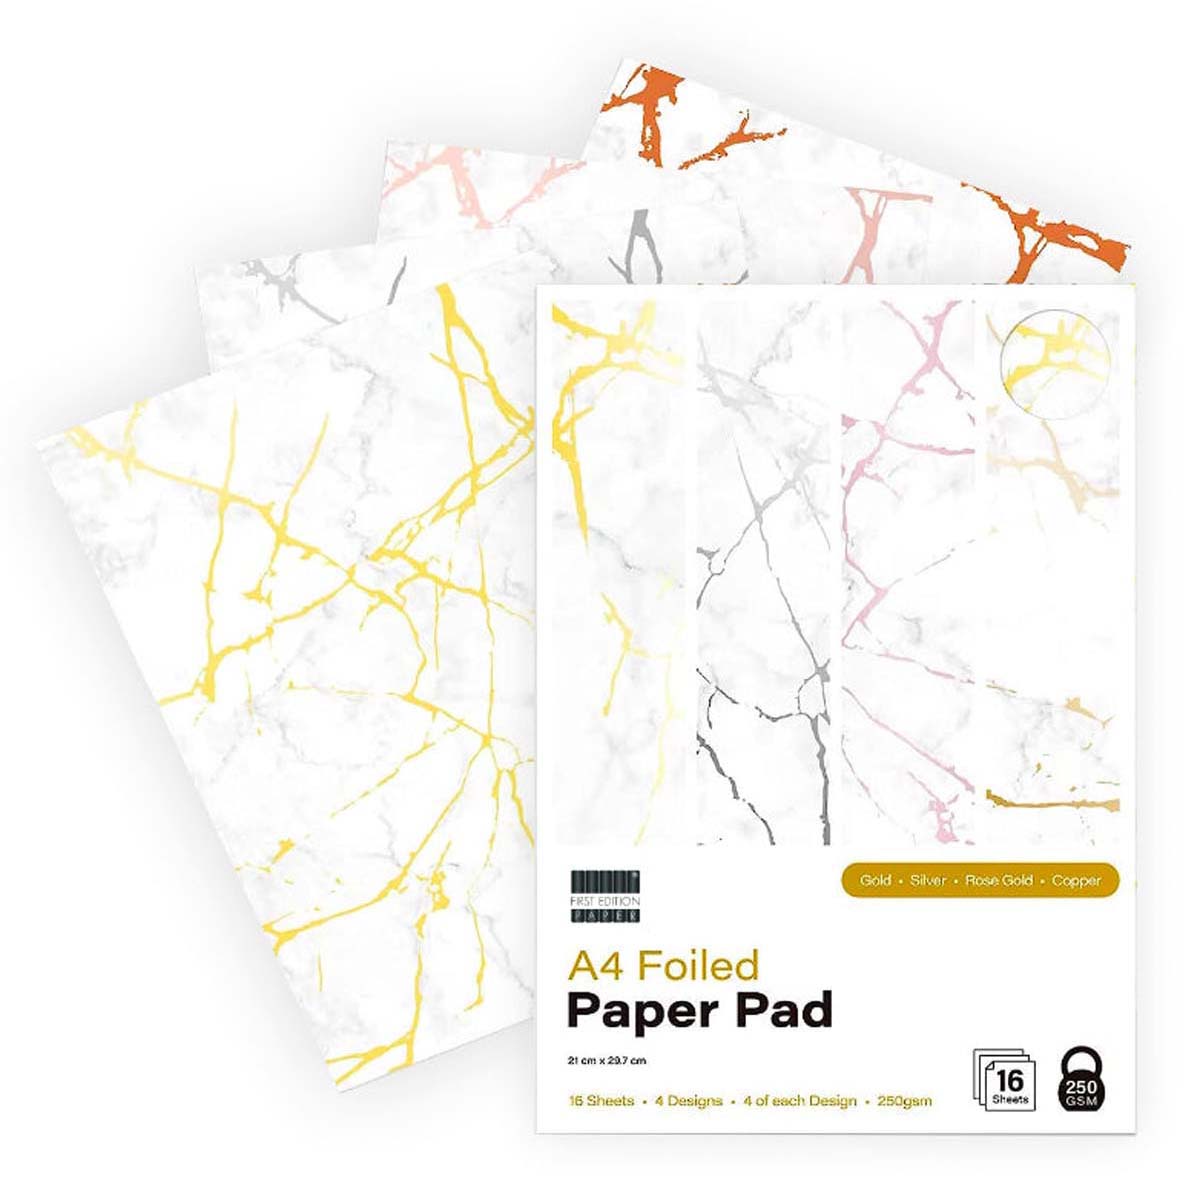 First Edition - A4 Foiled Paper Pad White 250gsm